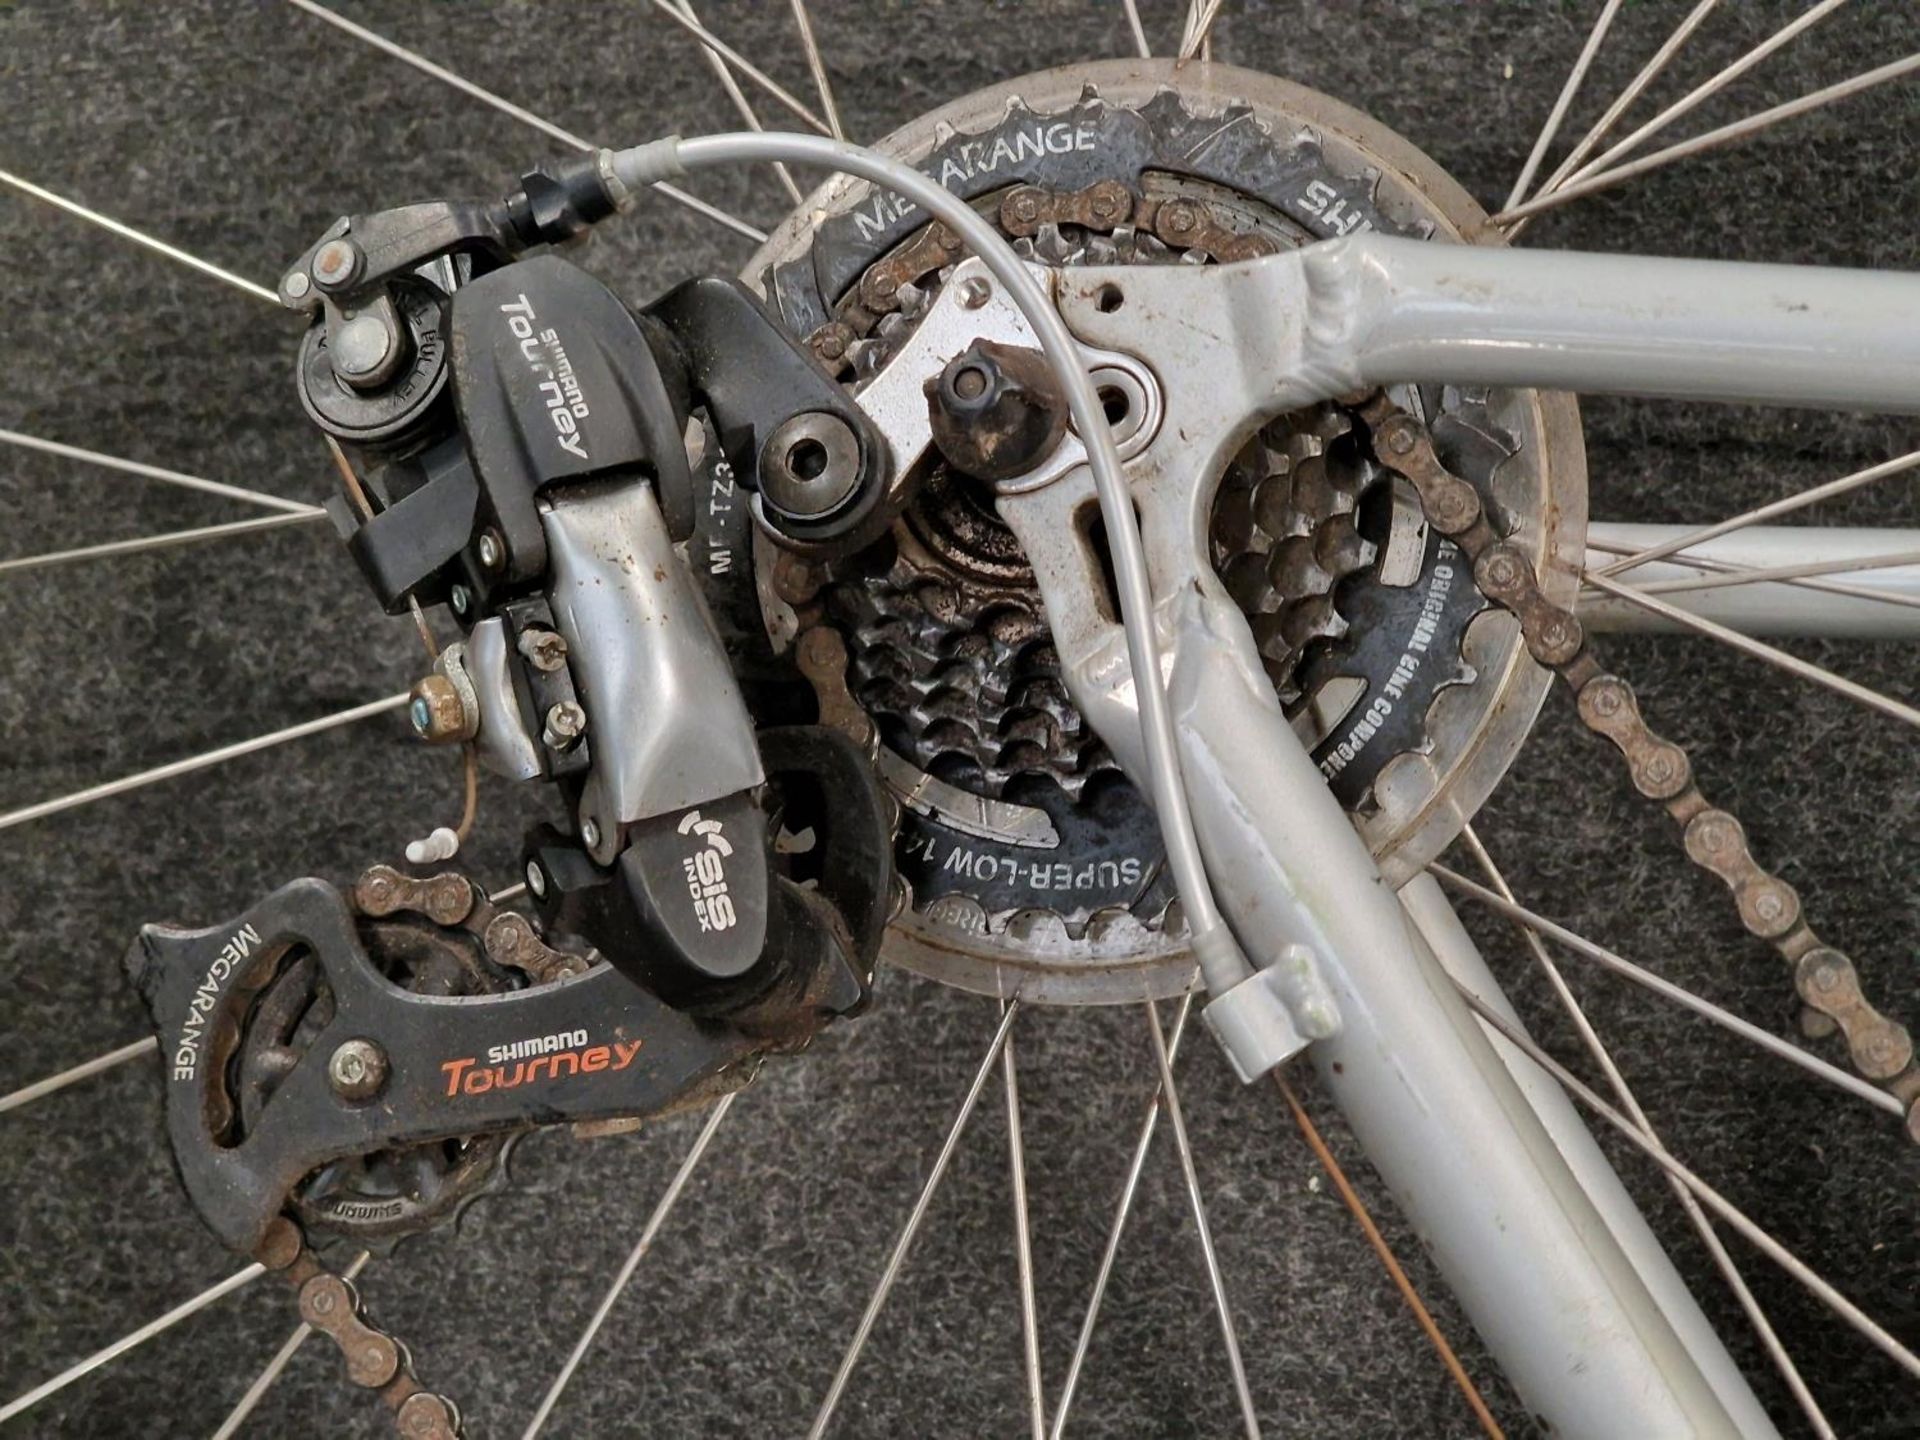 Giant CRS bicycle having 21 gears with Shimano gear change, in clean condition - Image 3 of 3